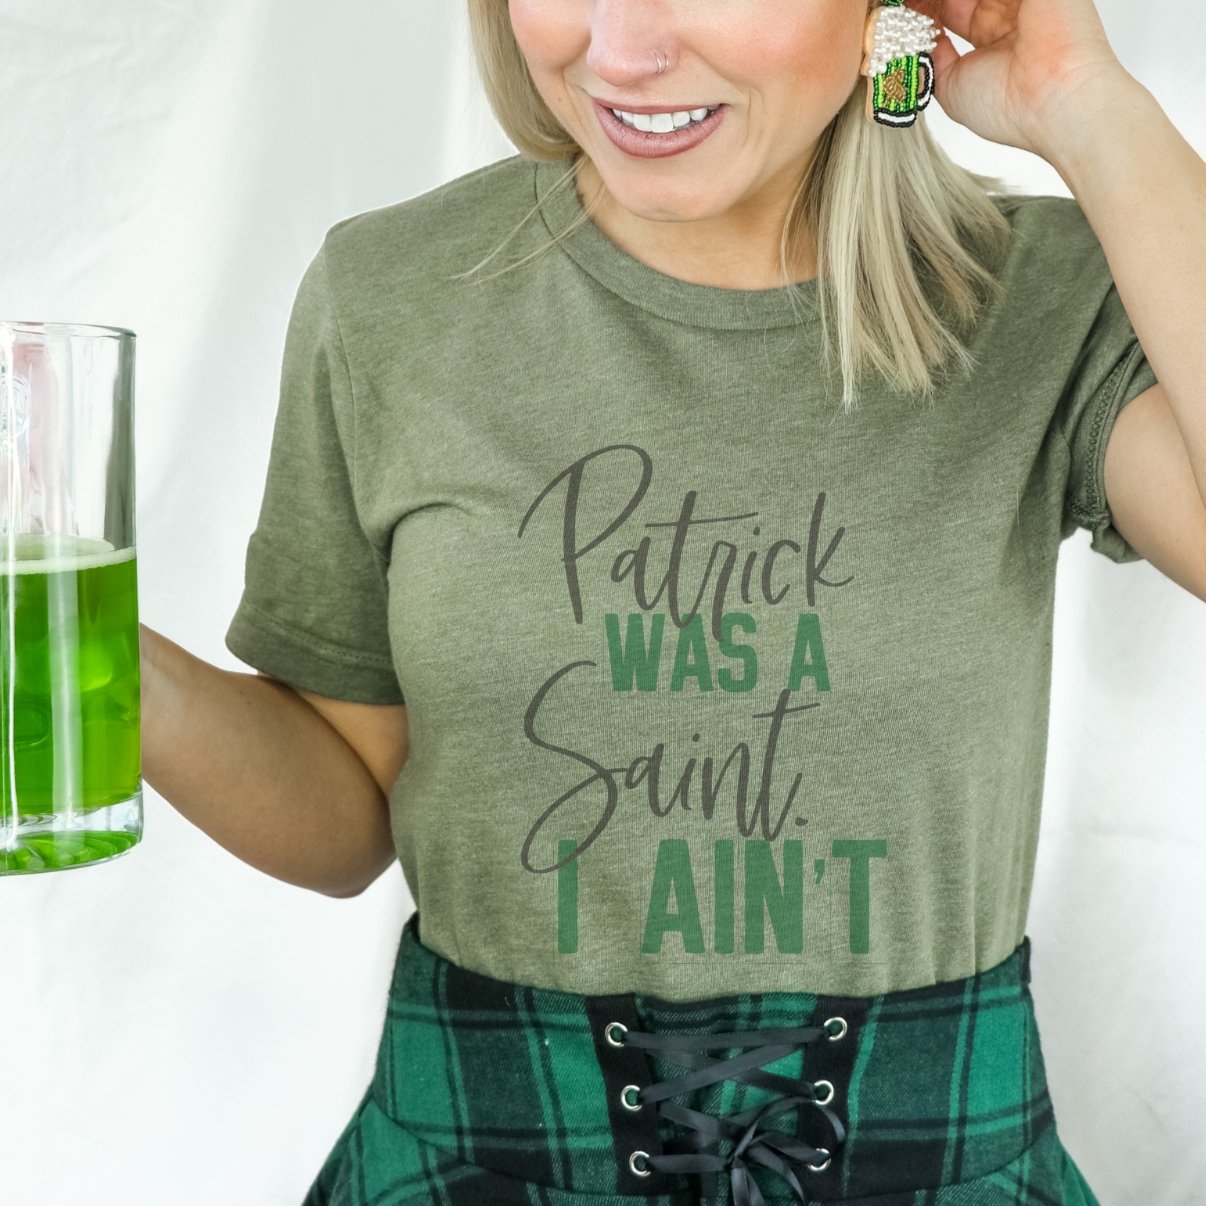 Patrick was a Saint I Ain't St. Patrick's Day T-Shirt (S-2XL) - Trendznmore